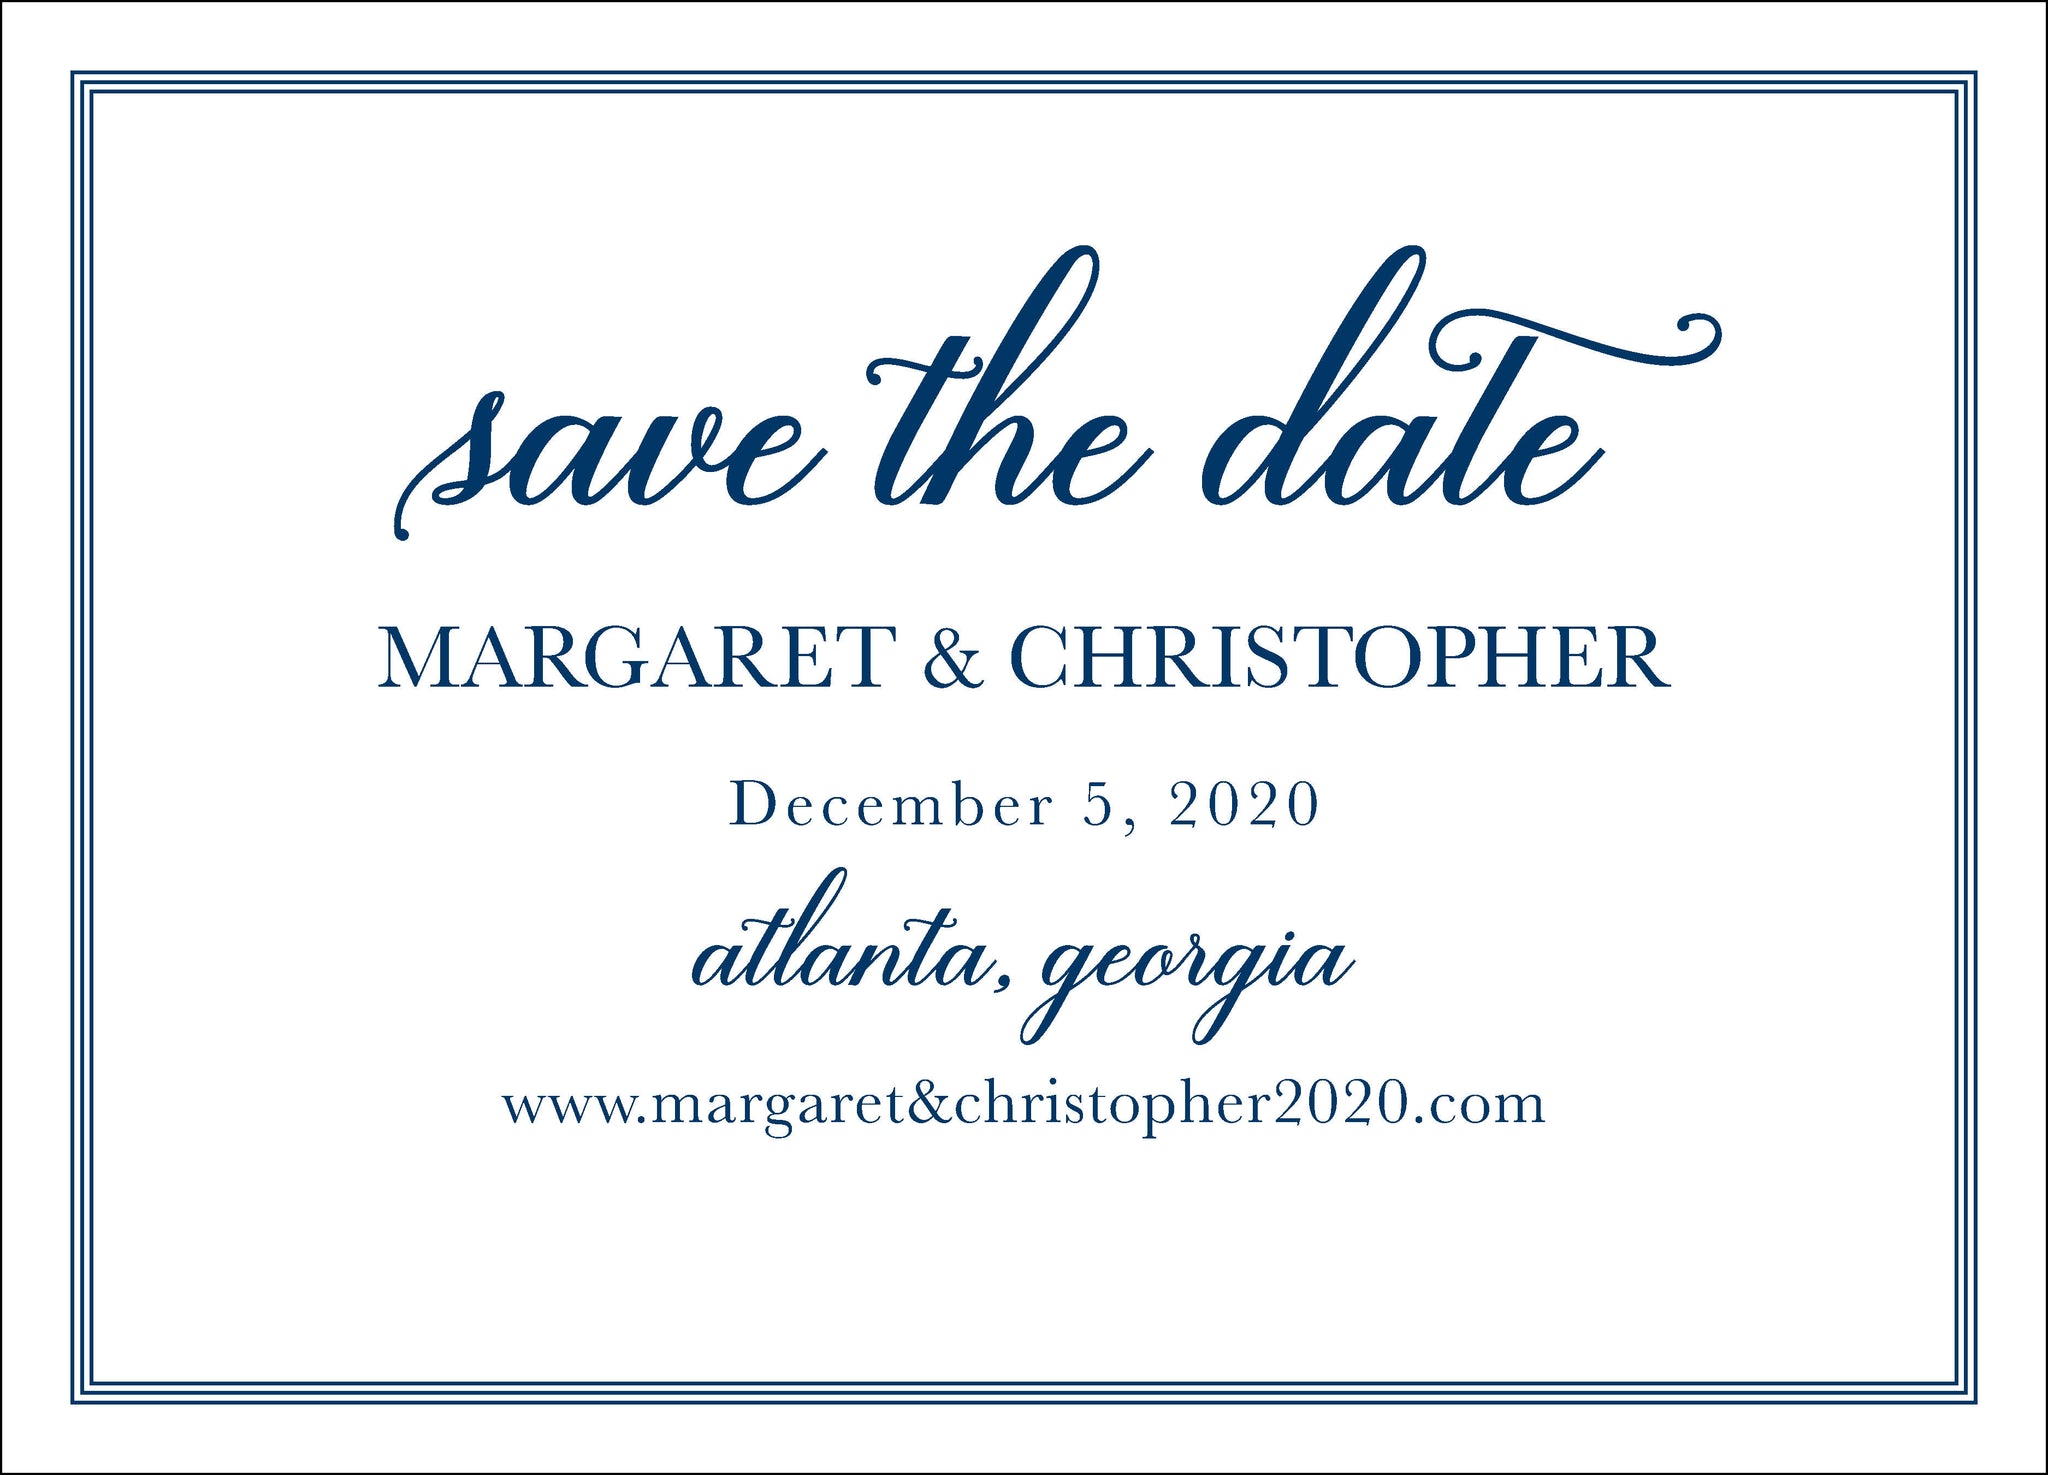 The Margaret Suite Save the Date